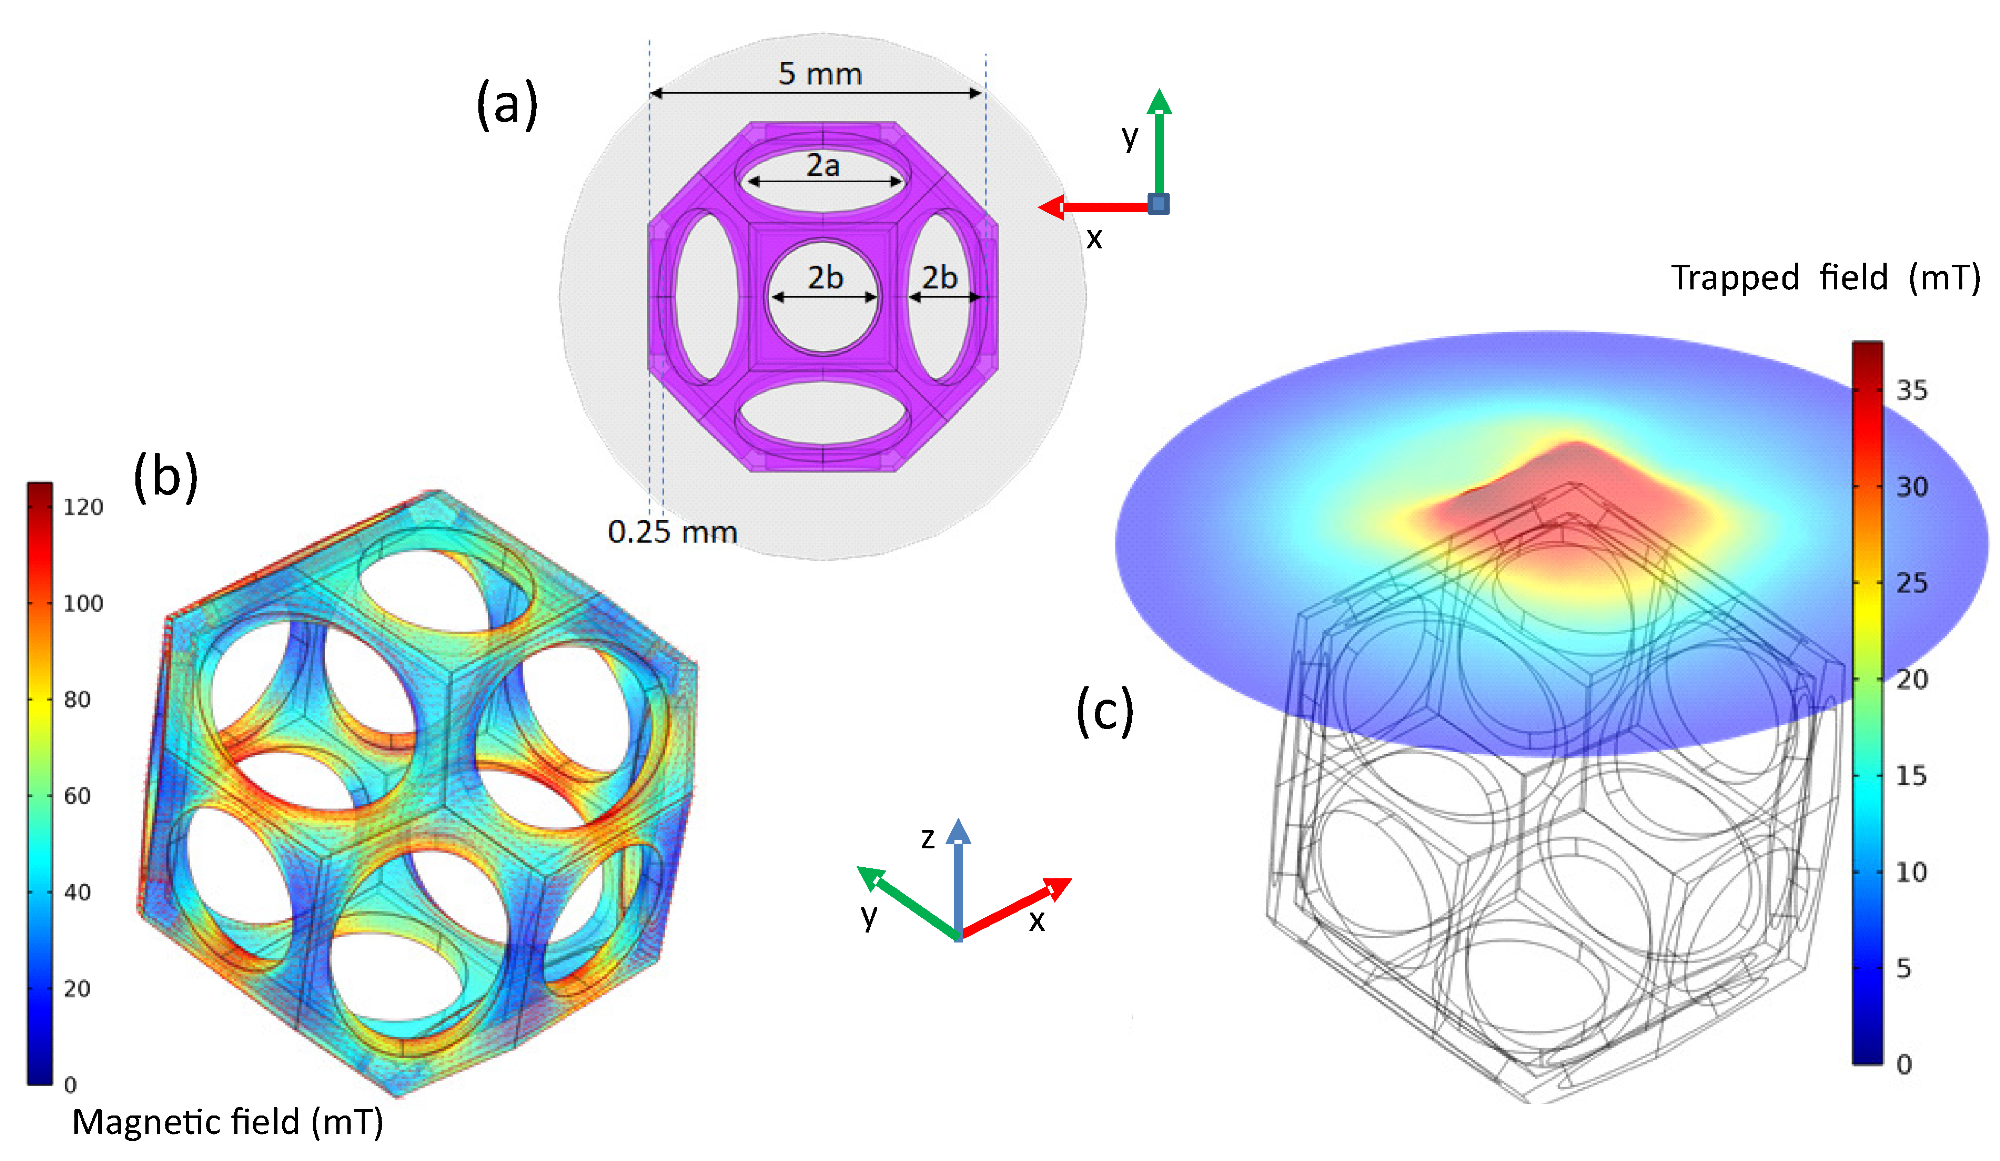 First modelling of trapped fields of a foam using the Kelvin cell, the dimensions of which are given in (a). (b) presents the distribution of the local magnetic field after field cooling in a field of 50 mT, and (c) gives the trapped field distribution at 2.75 mm above the foam.